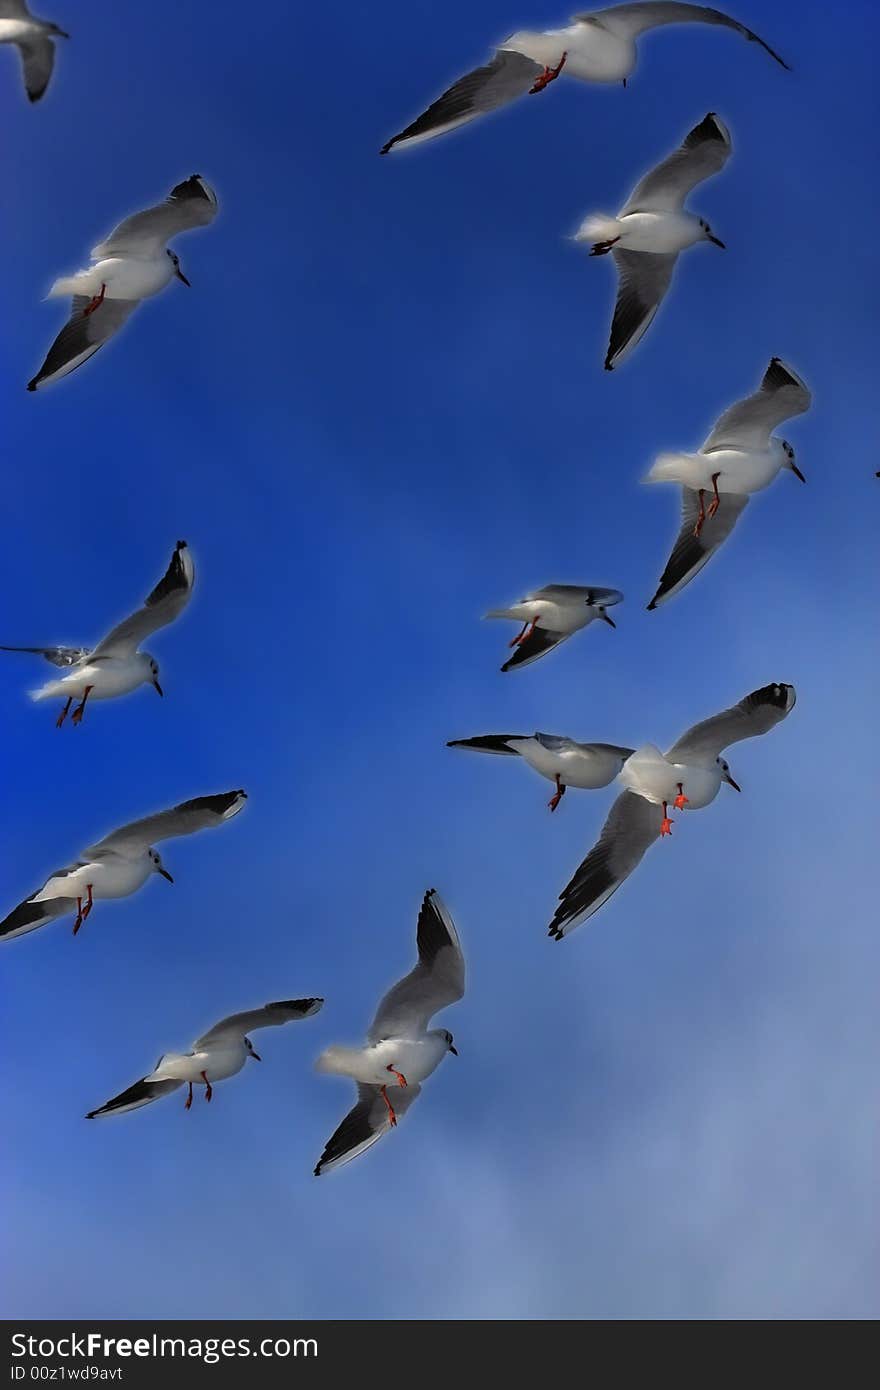 Seagulls are flying high at deep blue sky. Seagulls are flying high at deep blue sky